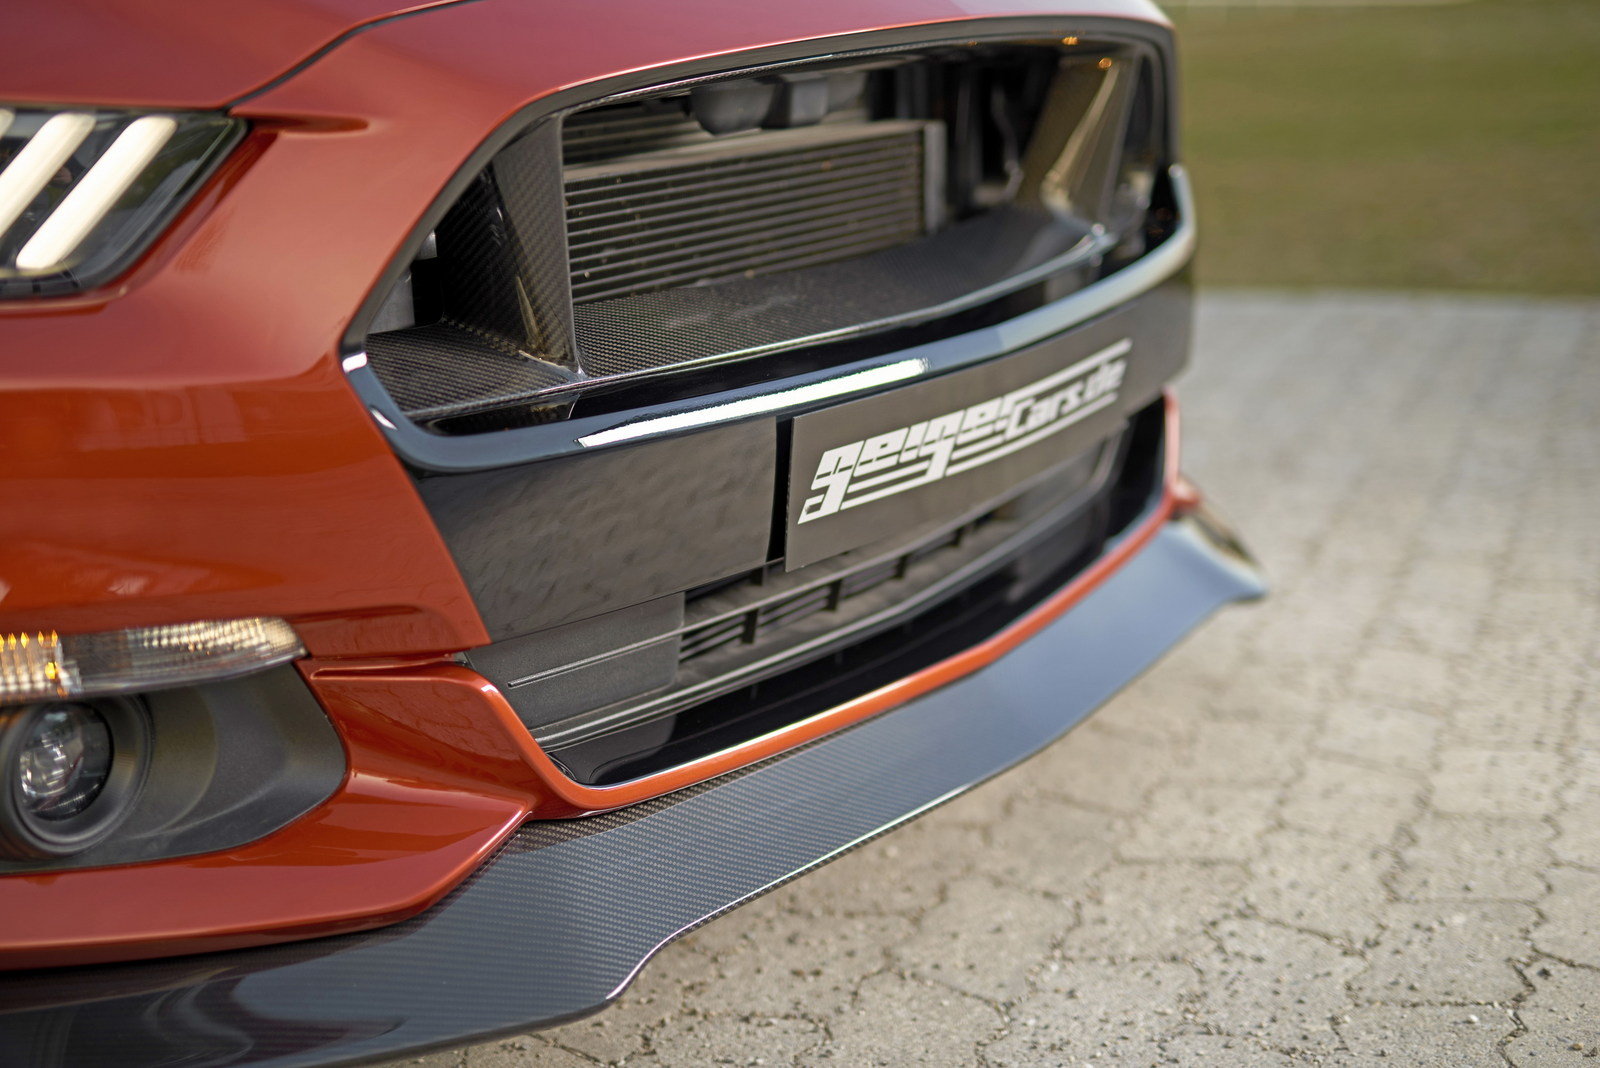 2016 Ford Mustang GT 820 By Geiger Cars - Picture 671408 | car review ...